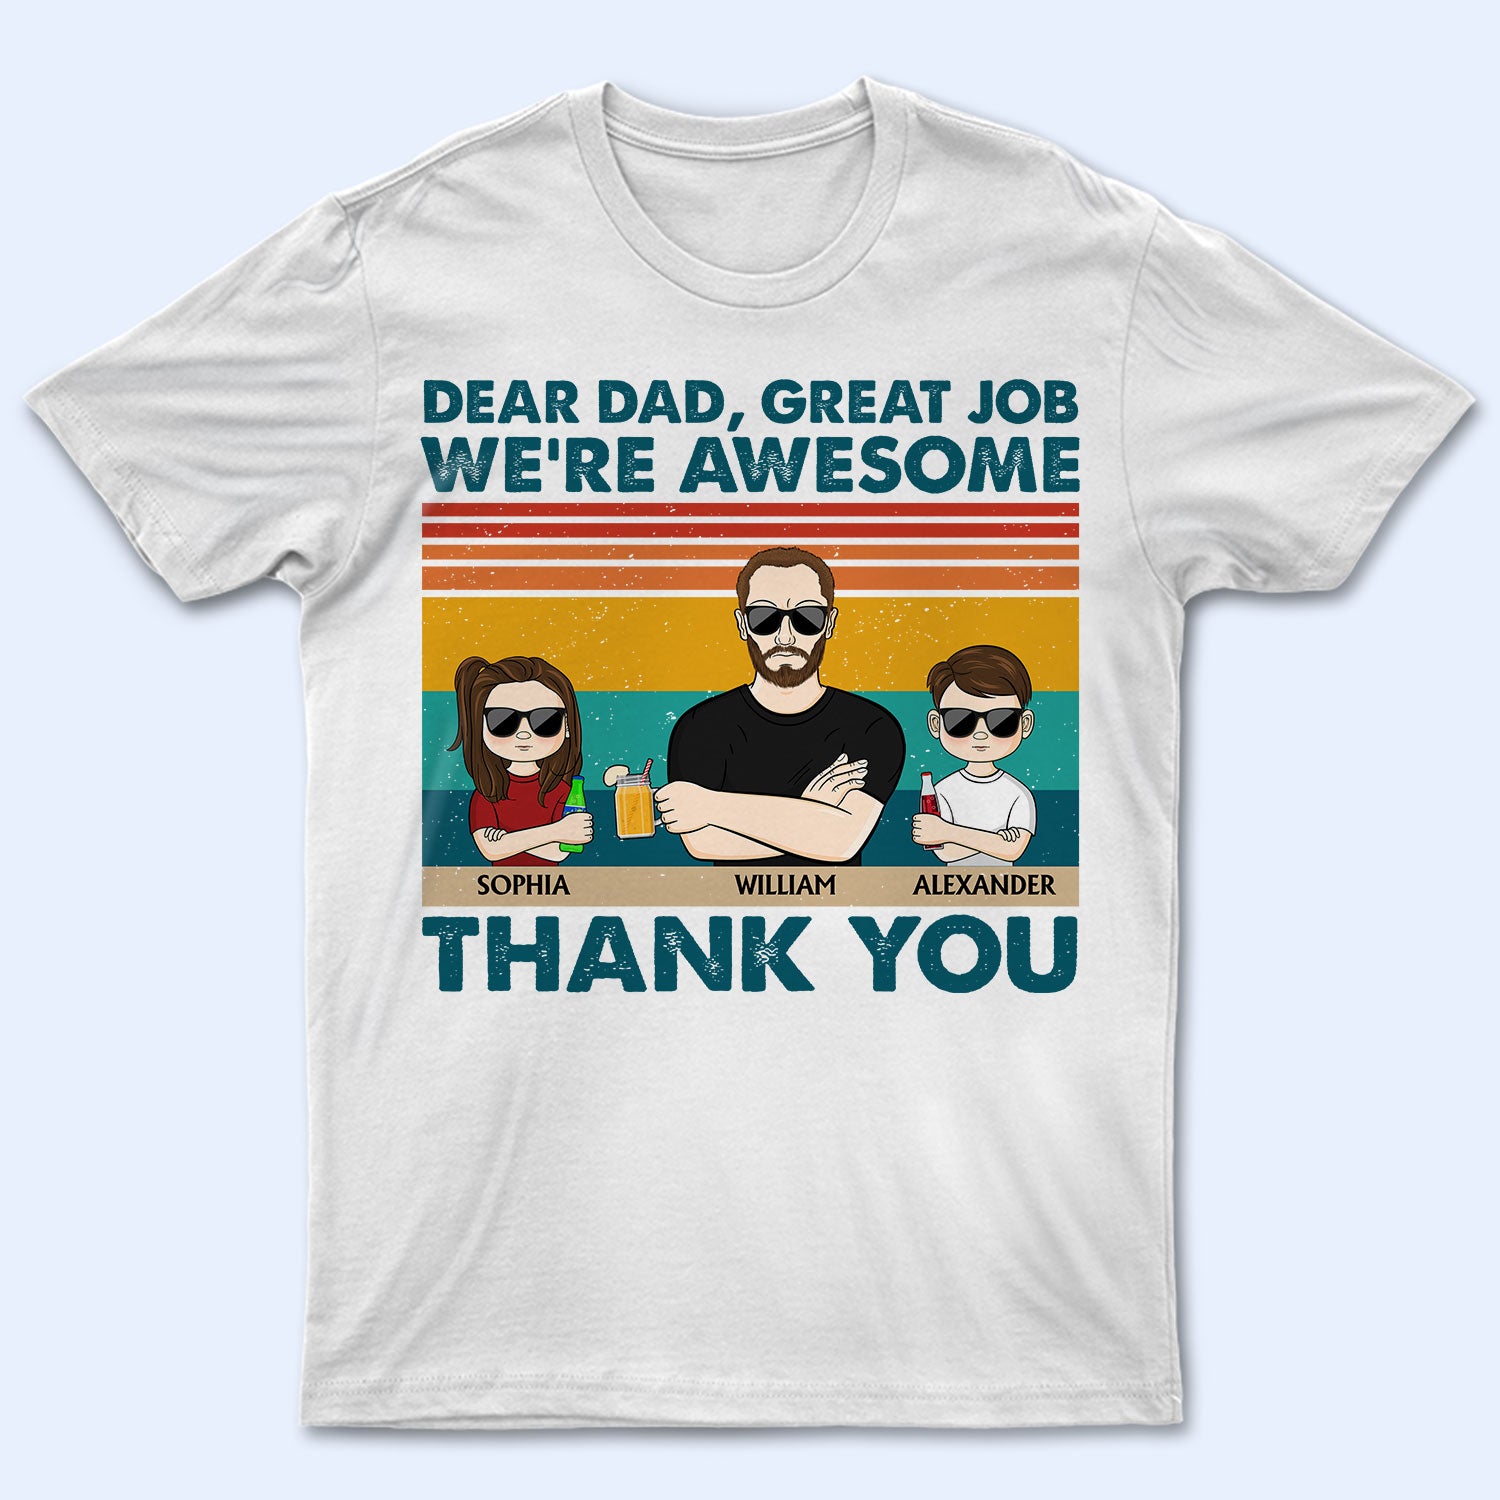 Dear Dad Great Job We're Awesome Thank You Light - Funny, Birthday Gift For Father, Husband - Personalized Custom T Shirt